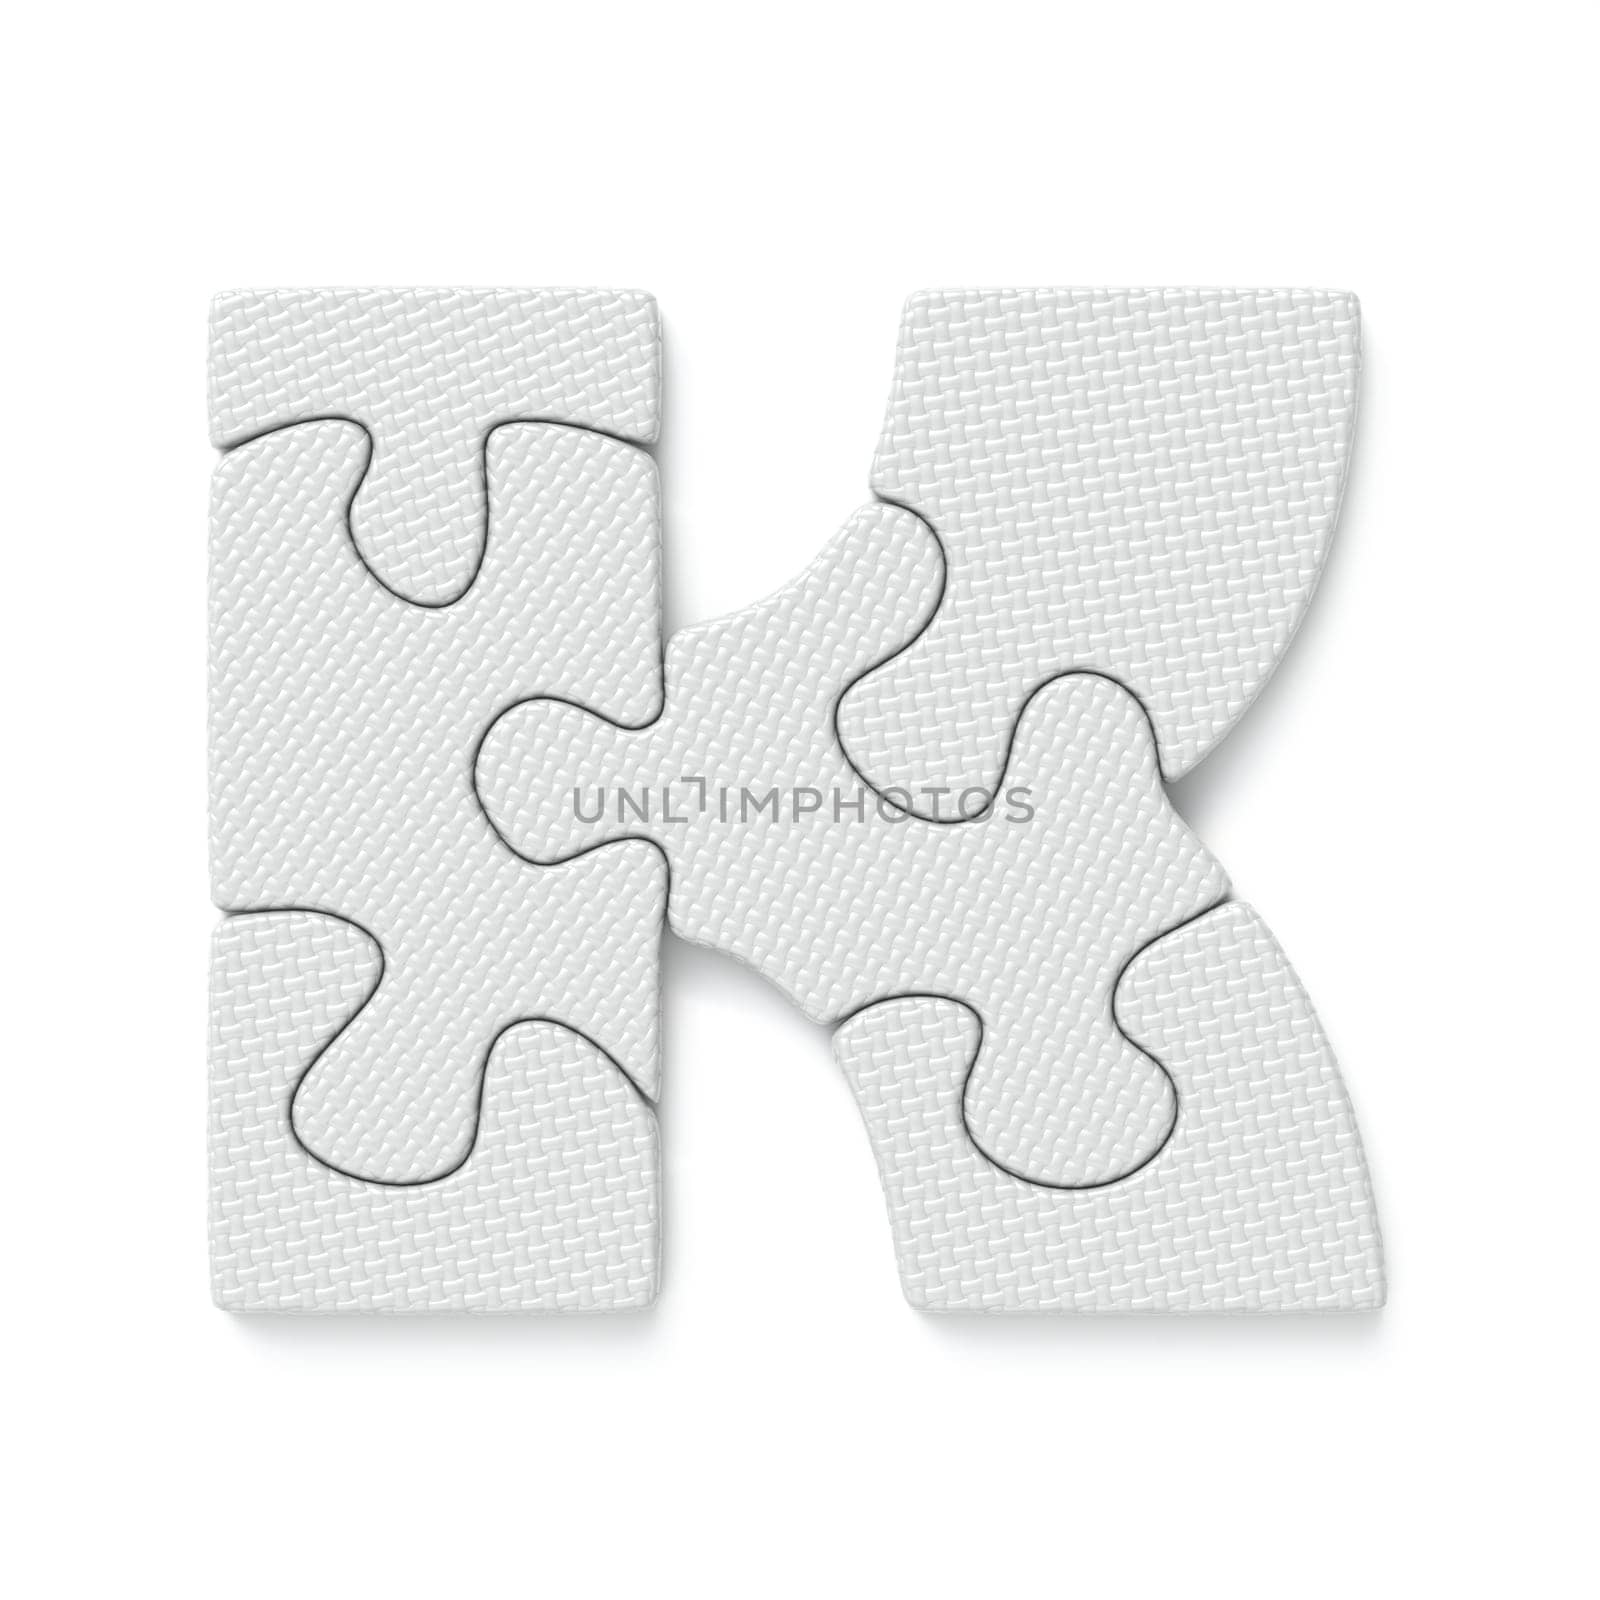 White jigsaw puzzle font Letter K 3D rendering illustration isolated on white background